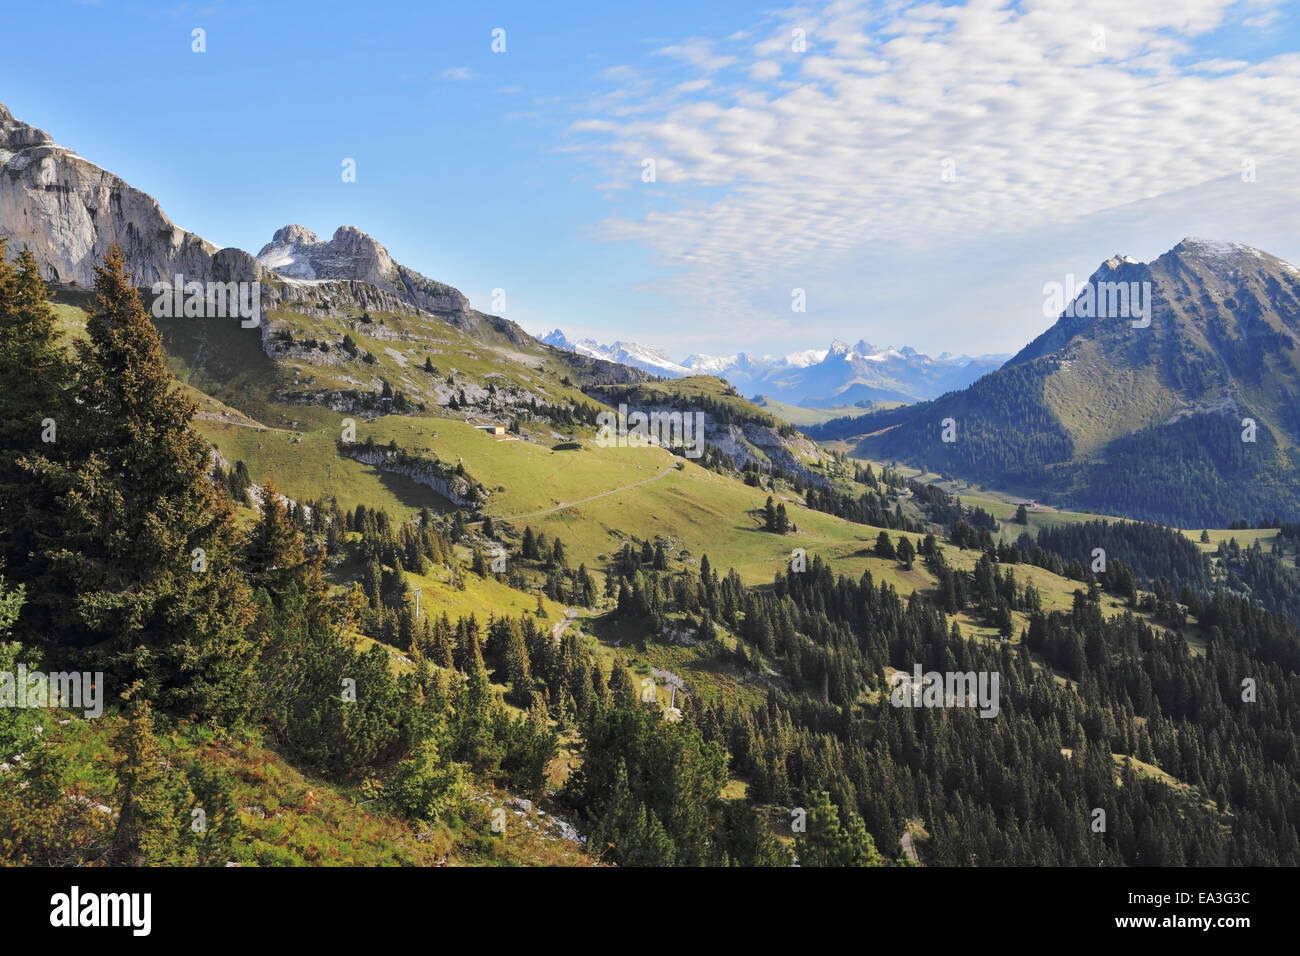 Green meadows and pine forests Stock Photo